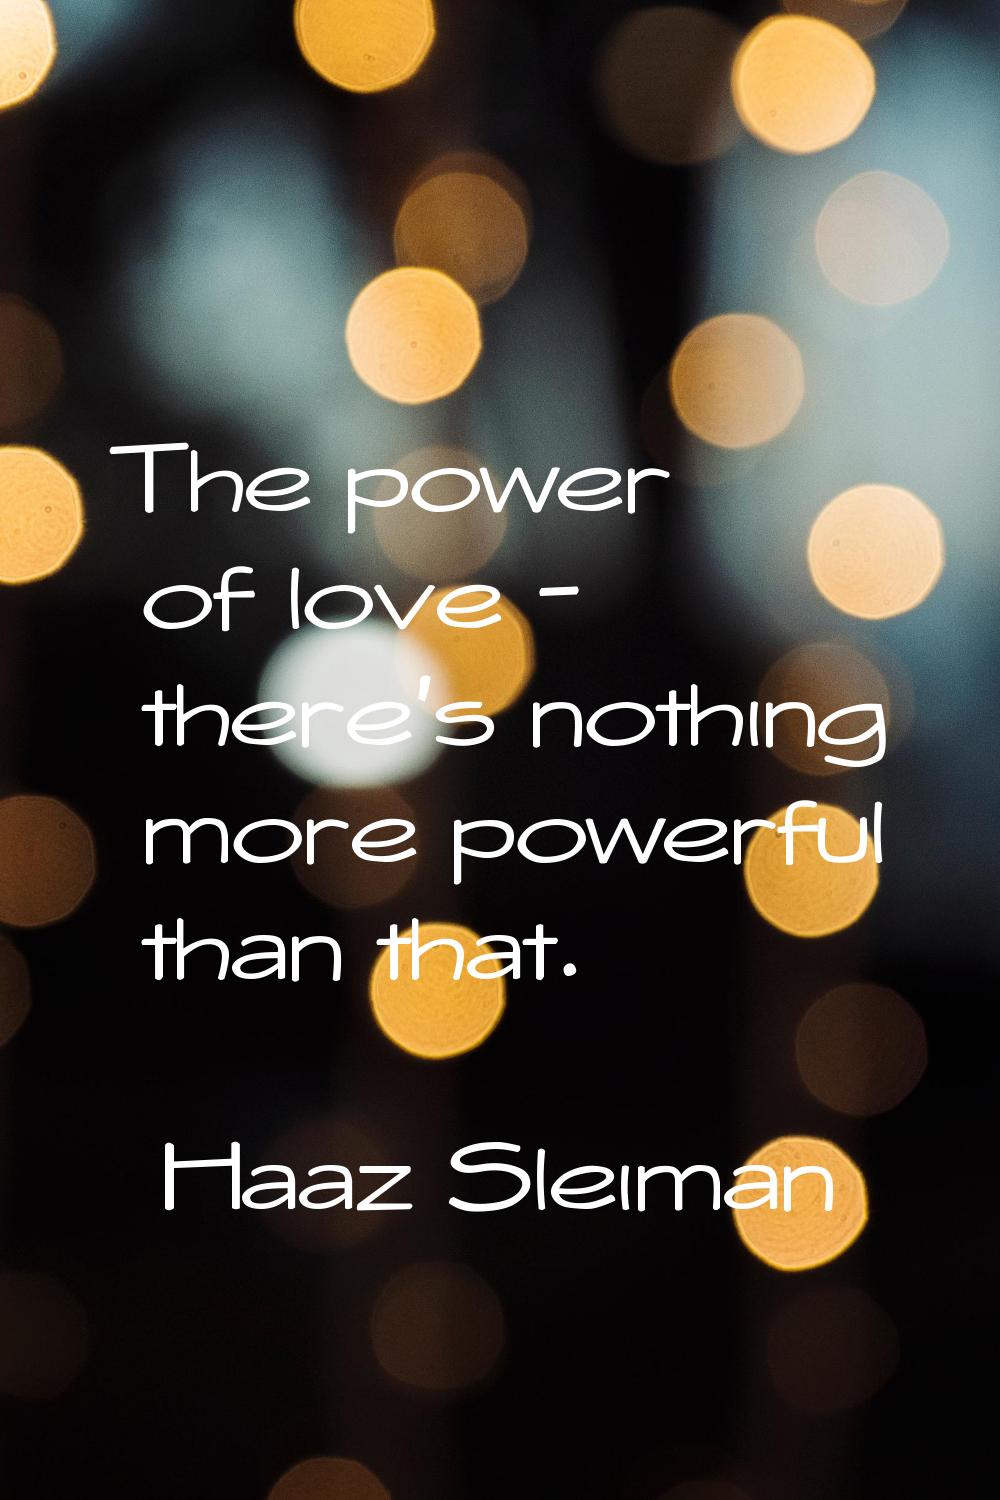 The power of love - there's nothing more powerful than that.